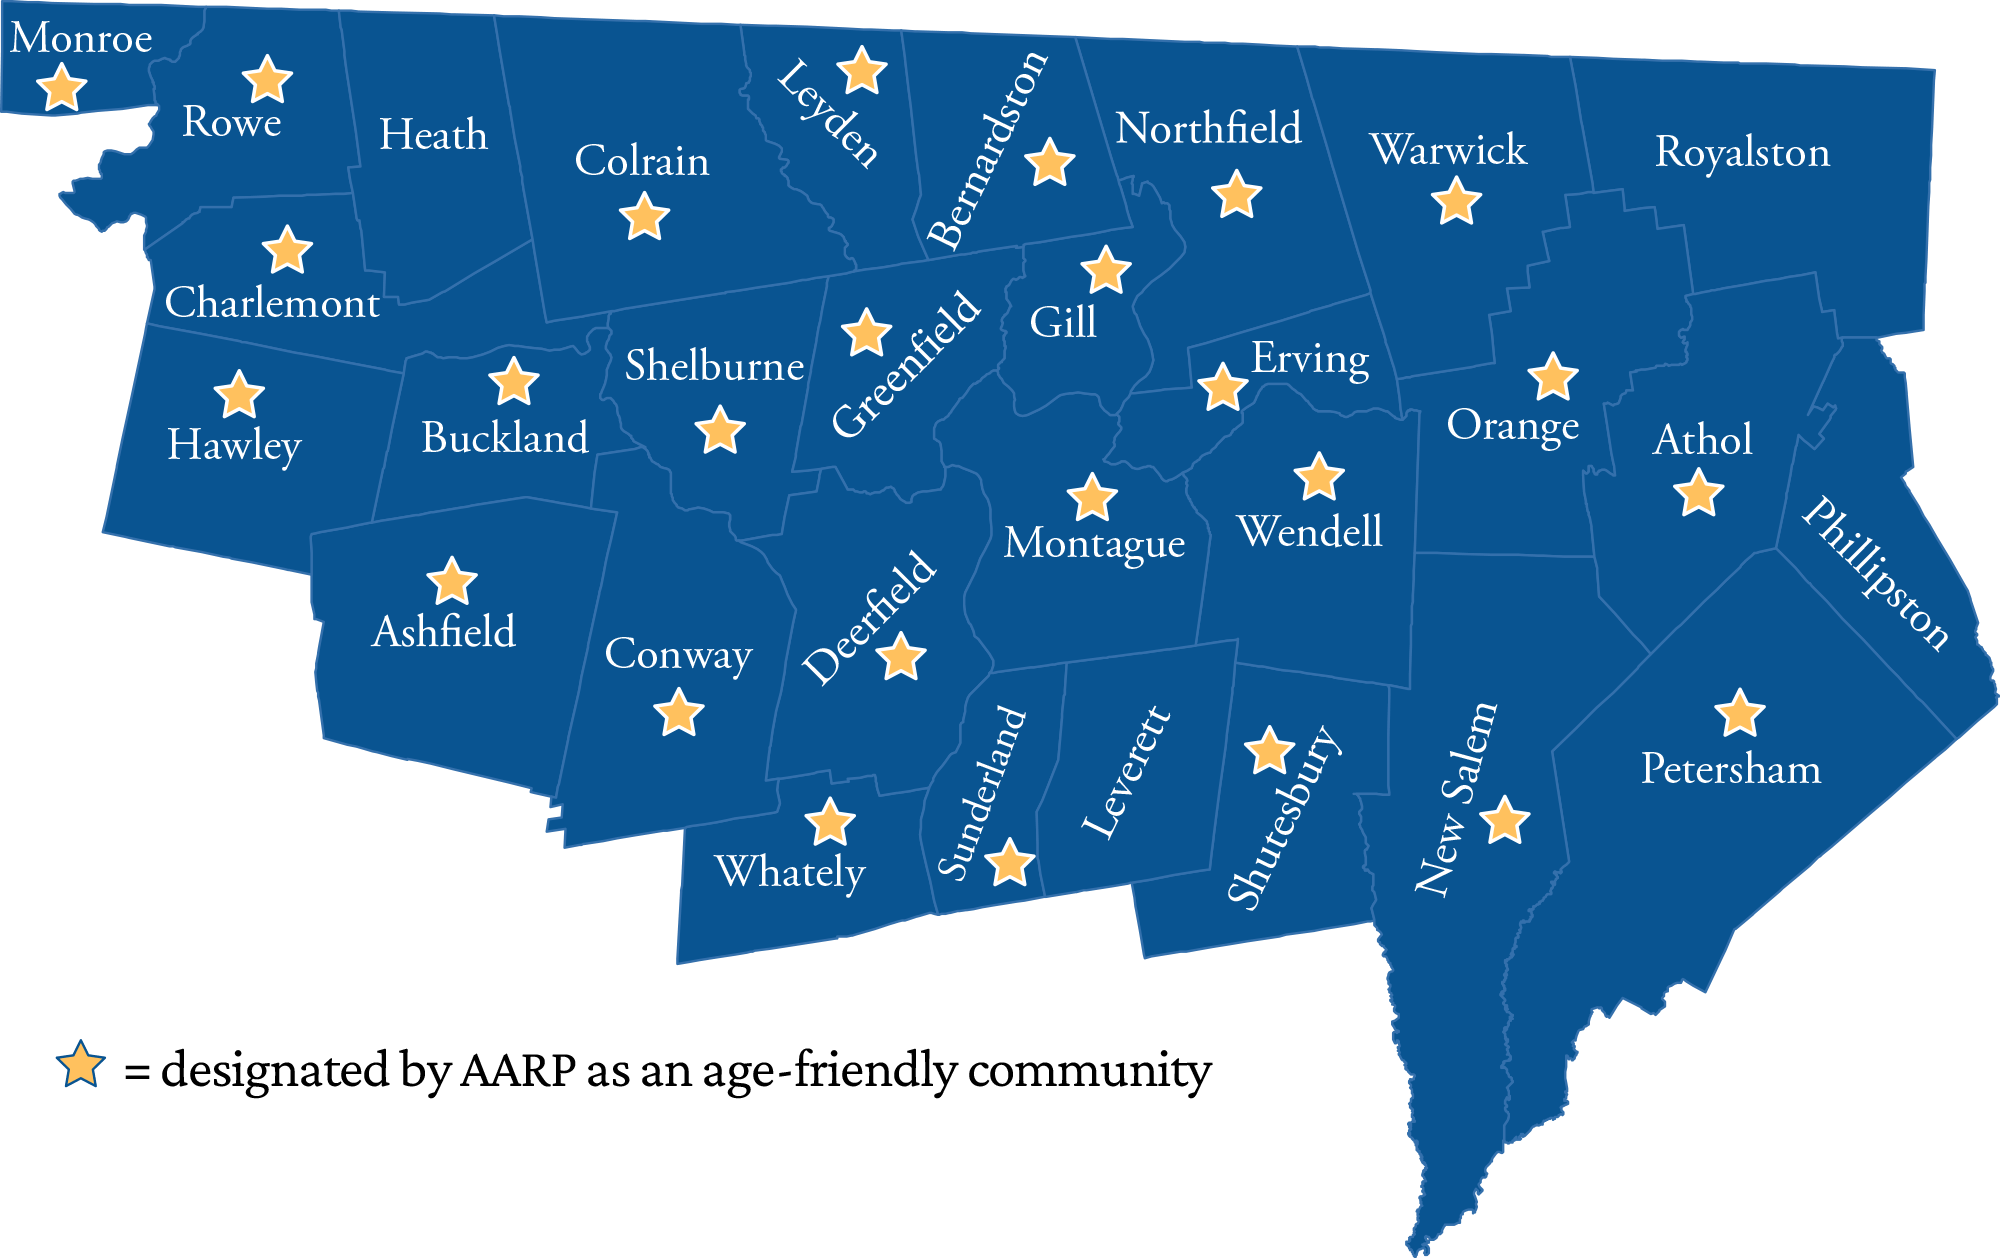 Map of Franklin County, Massachusetts, showing Age- and Dementia-Friendly Communities